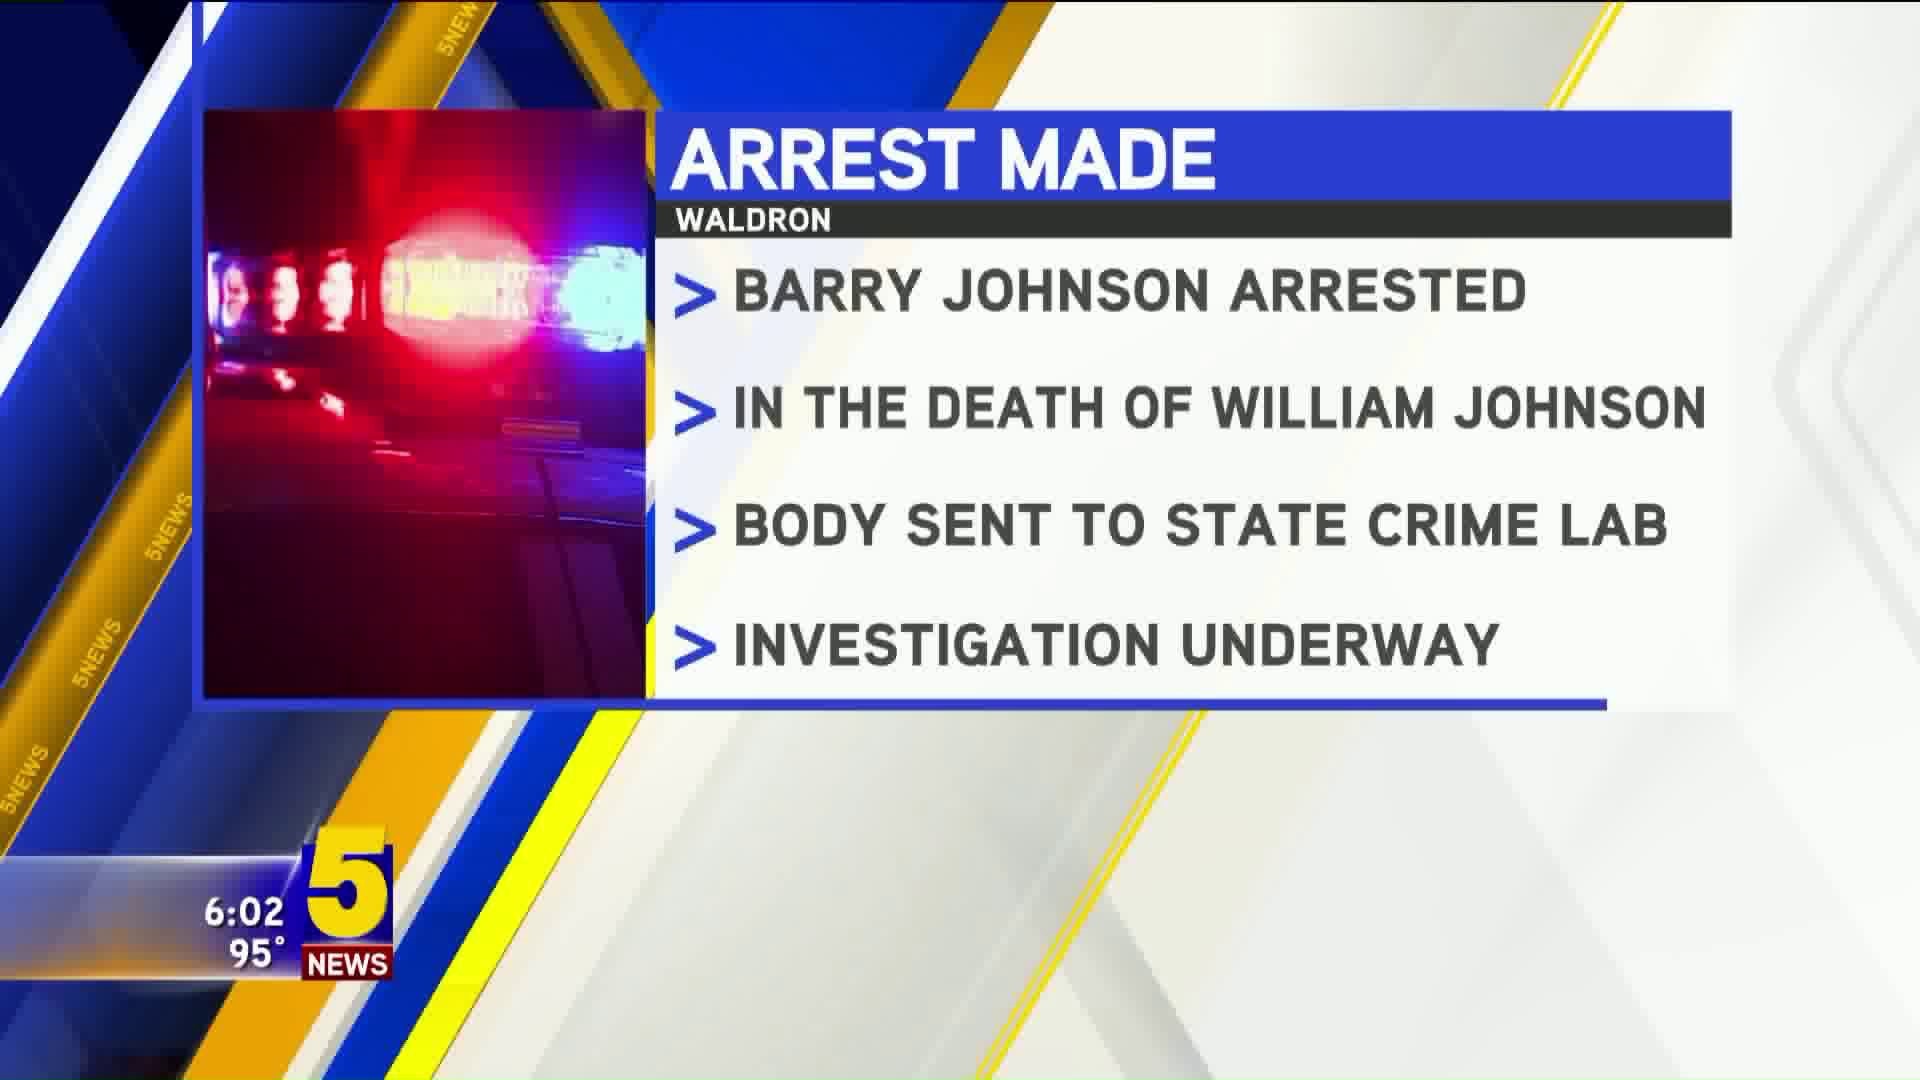 Man In Custody In Connection To Waldron Death